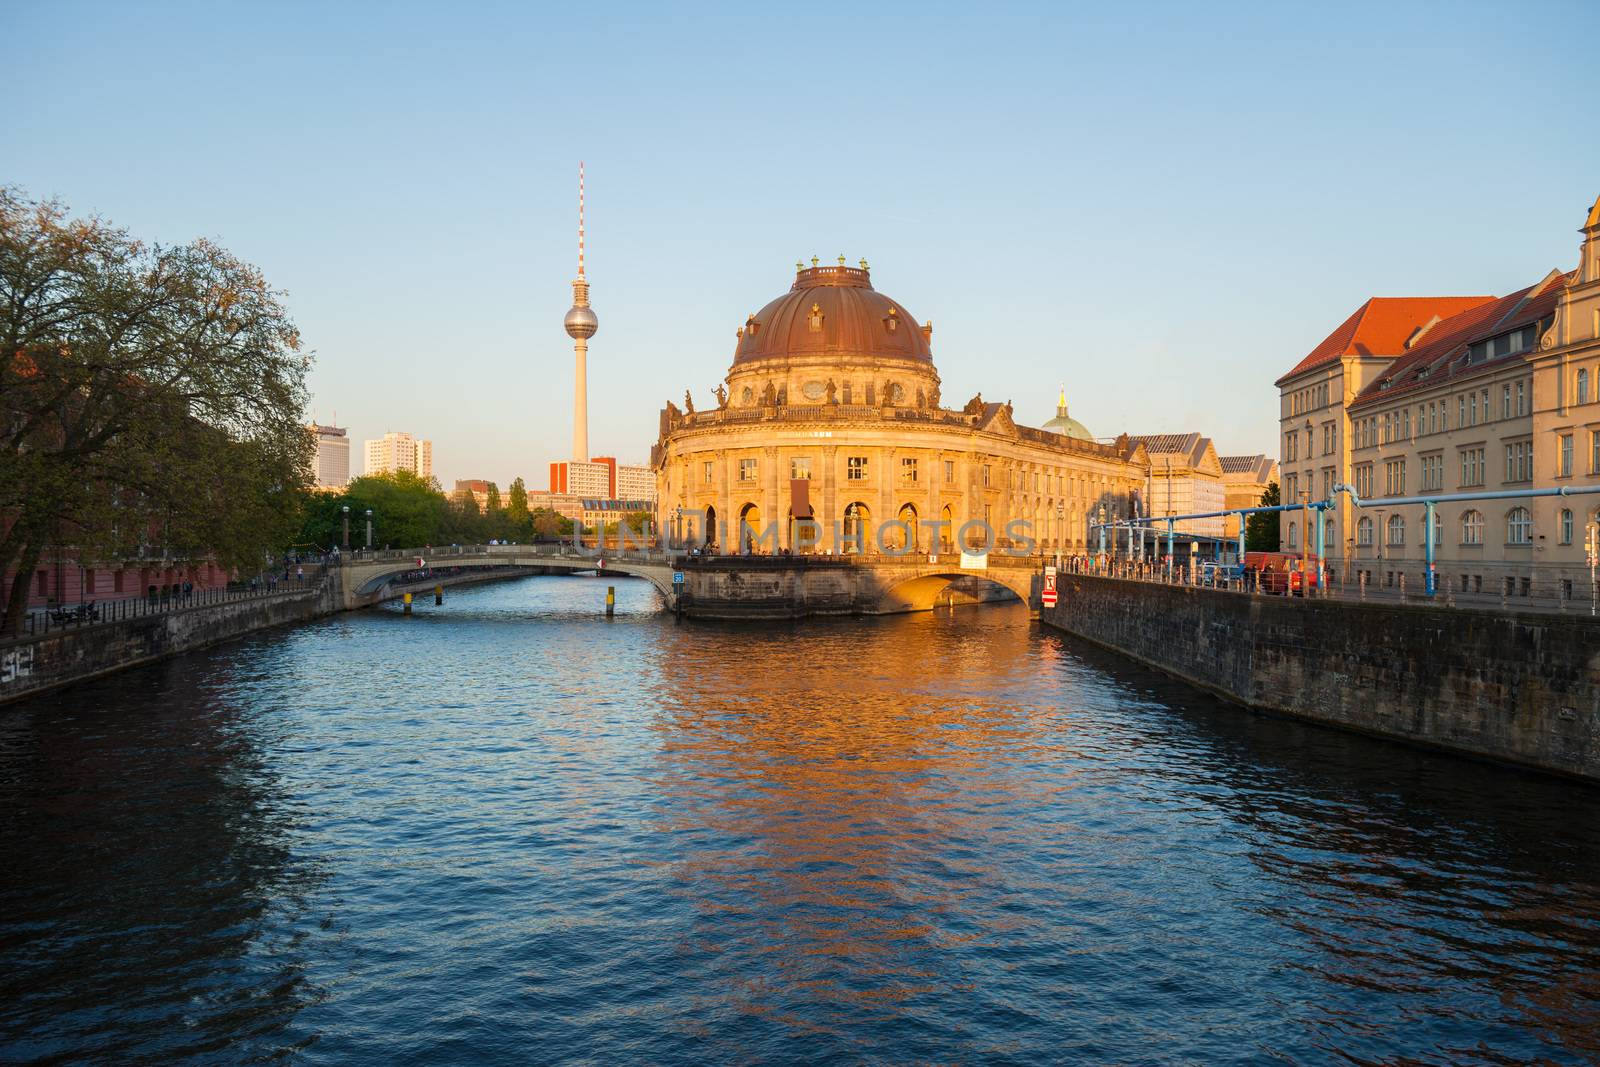 Berlin River Spree and famous round Bode Museum at twilight with TV Tower (Fernsehturm)